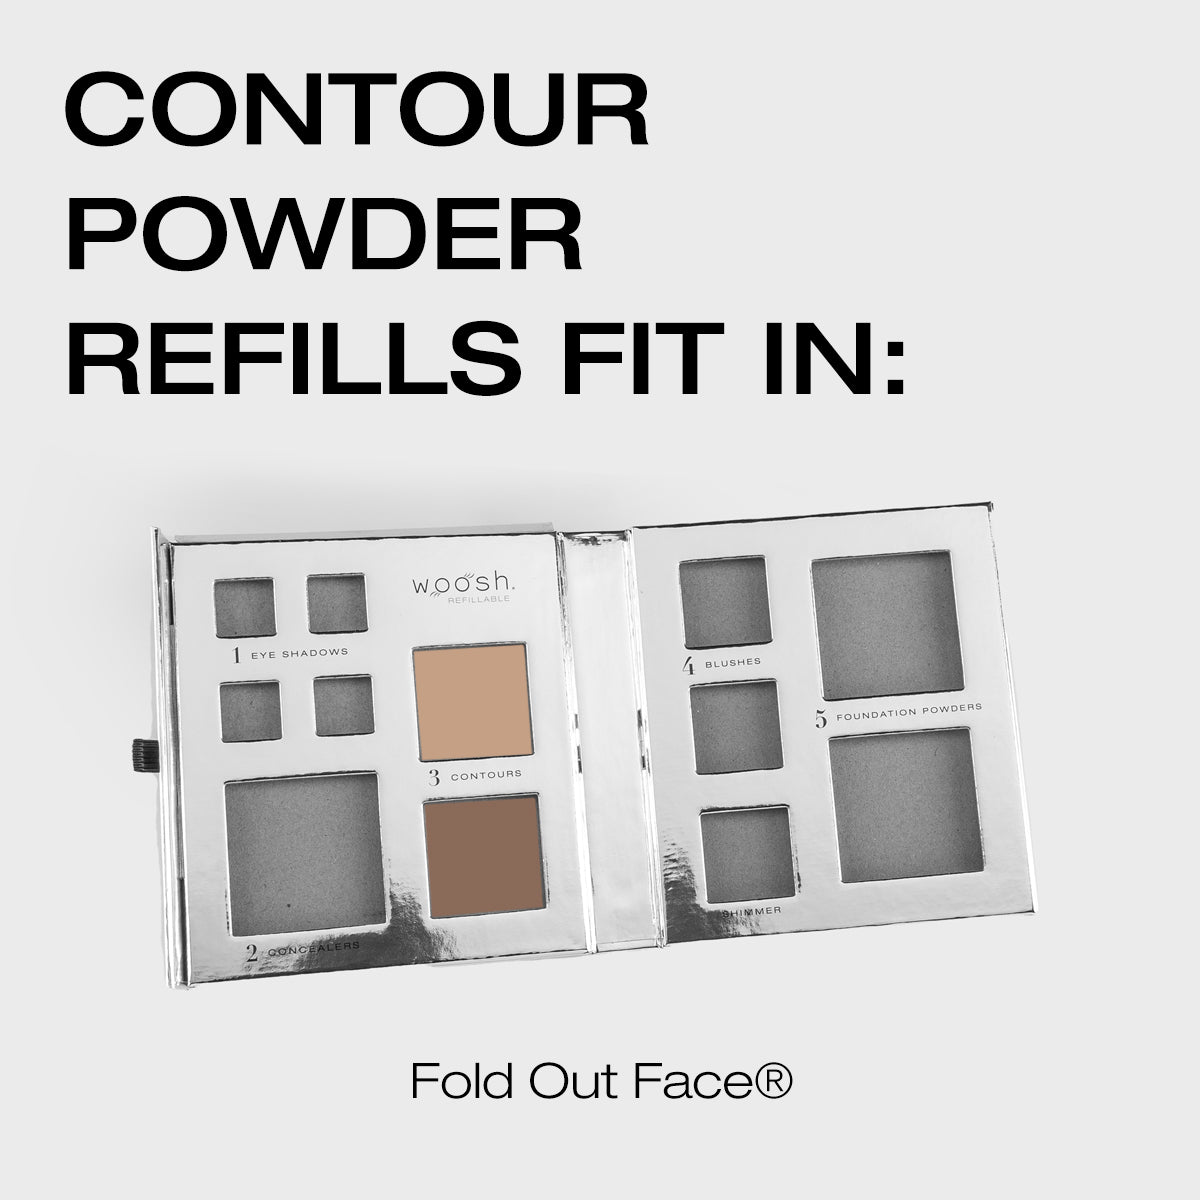 Contour powder refills fit in the fold out face